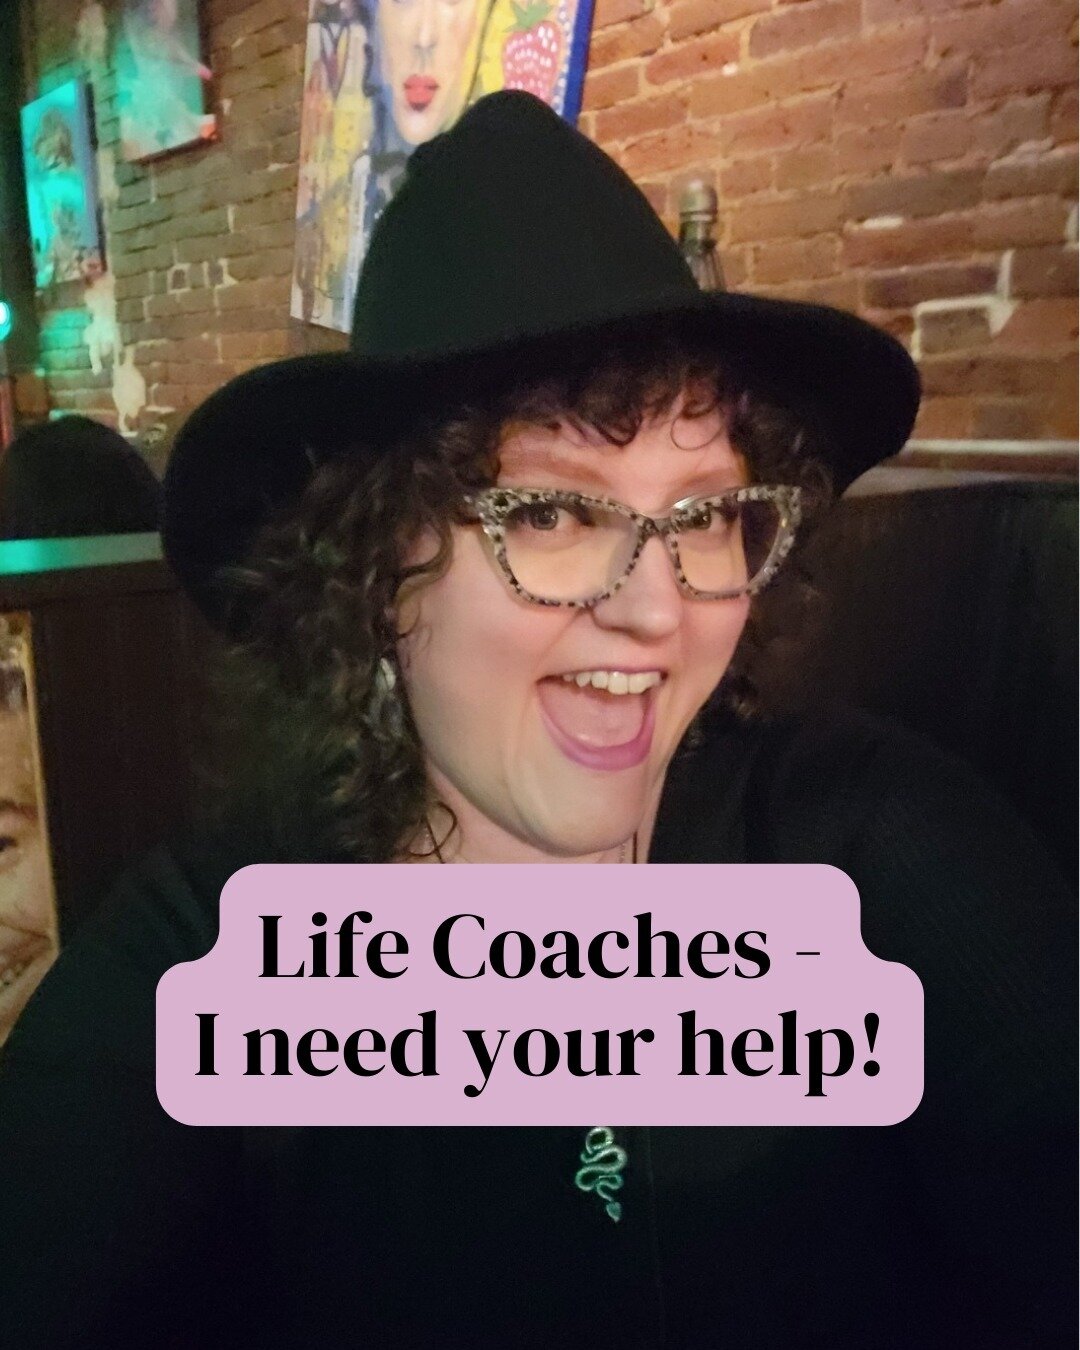 Life Coach Friends! I need your help.

I&rsquo;m creating an amazing program focused on helping life coaches increase their productivity. 

👉🏻 When I say &ldquo;life coaches,&rdquo; anyone in the transformation, mindset, or intuitive space fits per